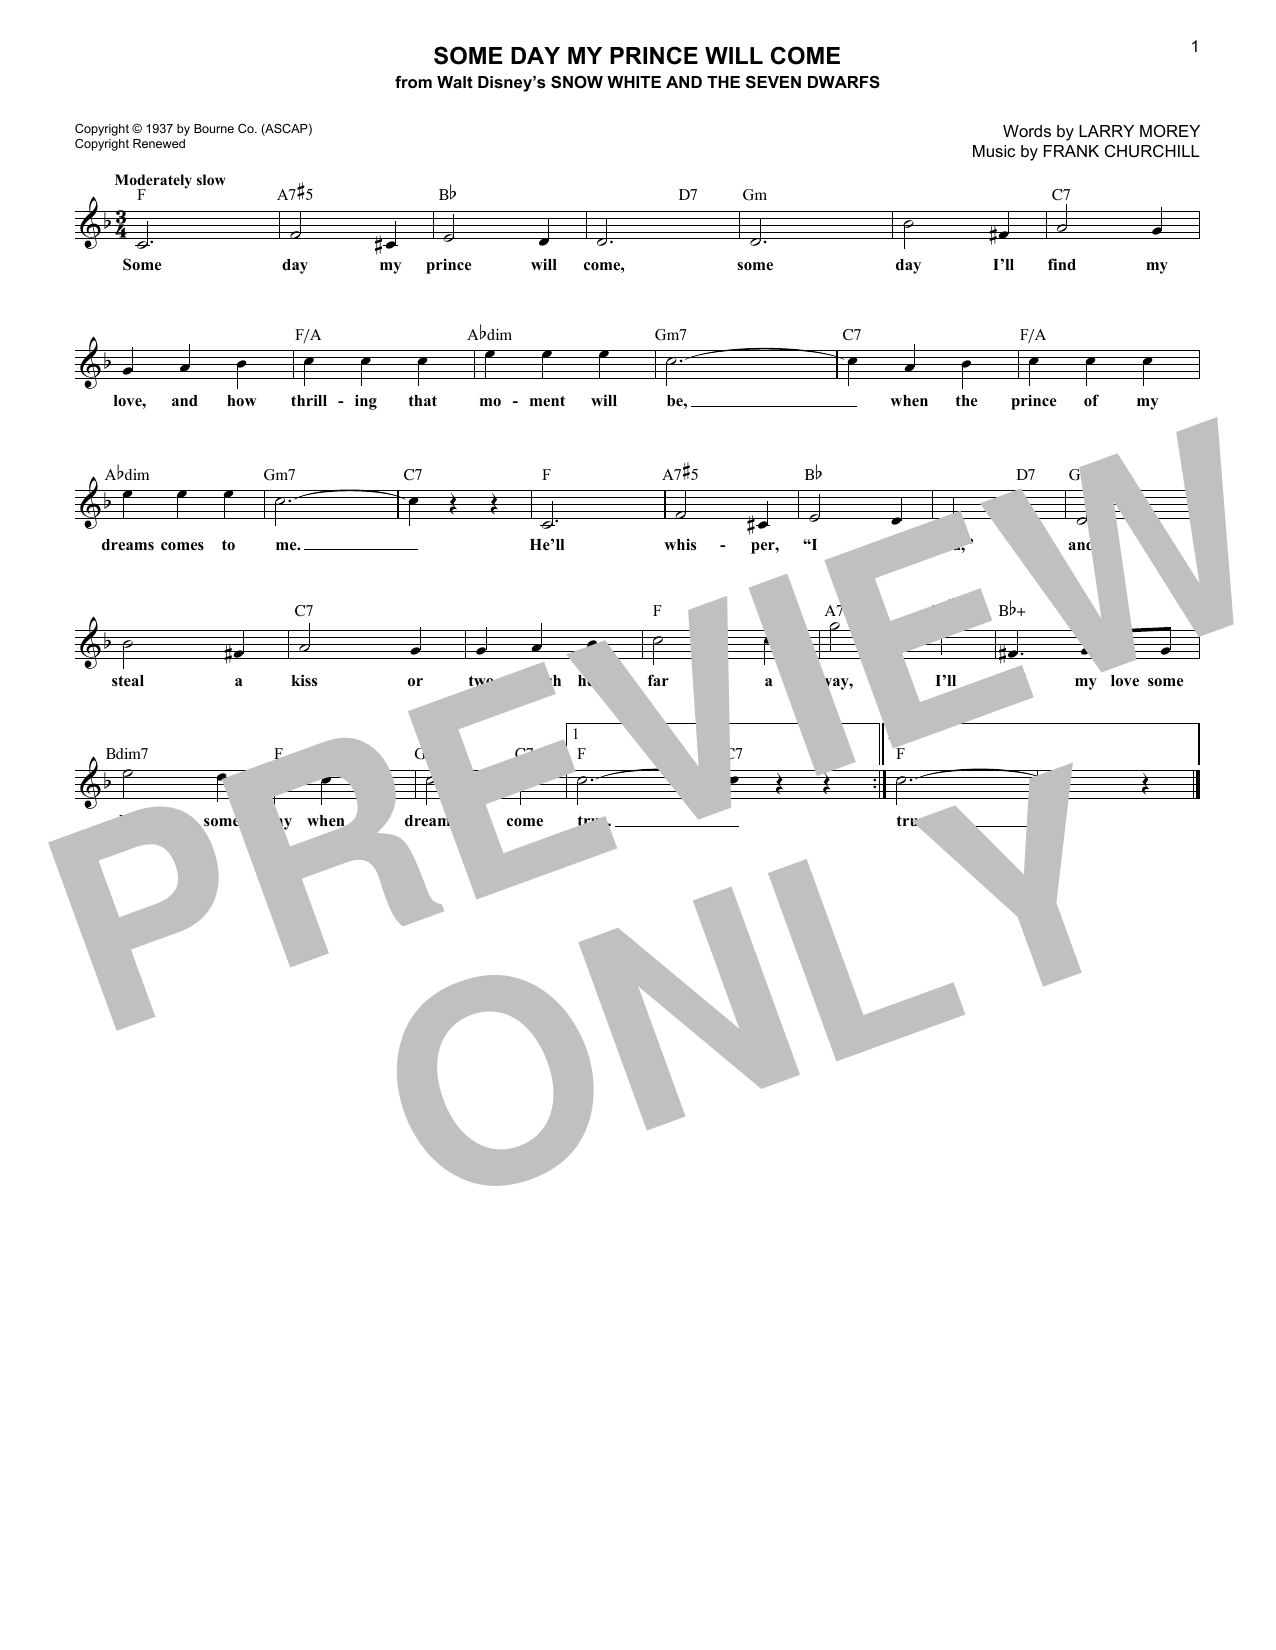 Download Frank Churchill Some Day My Prince Will Come Sheet Music